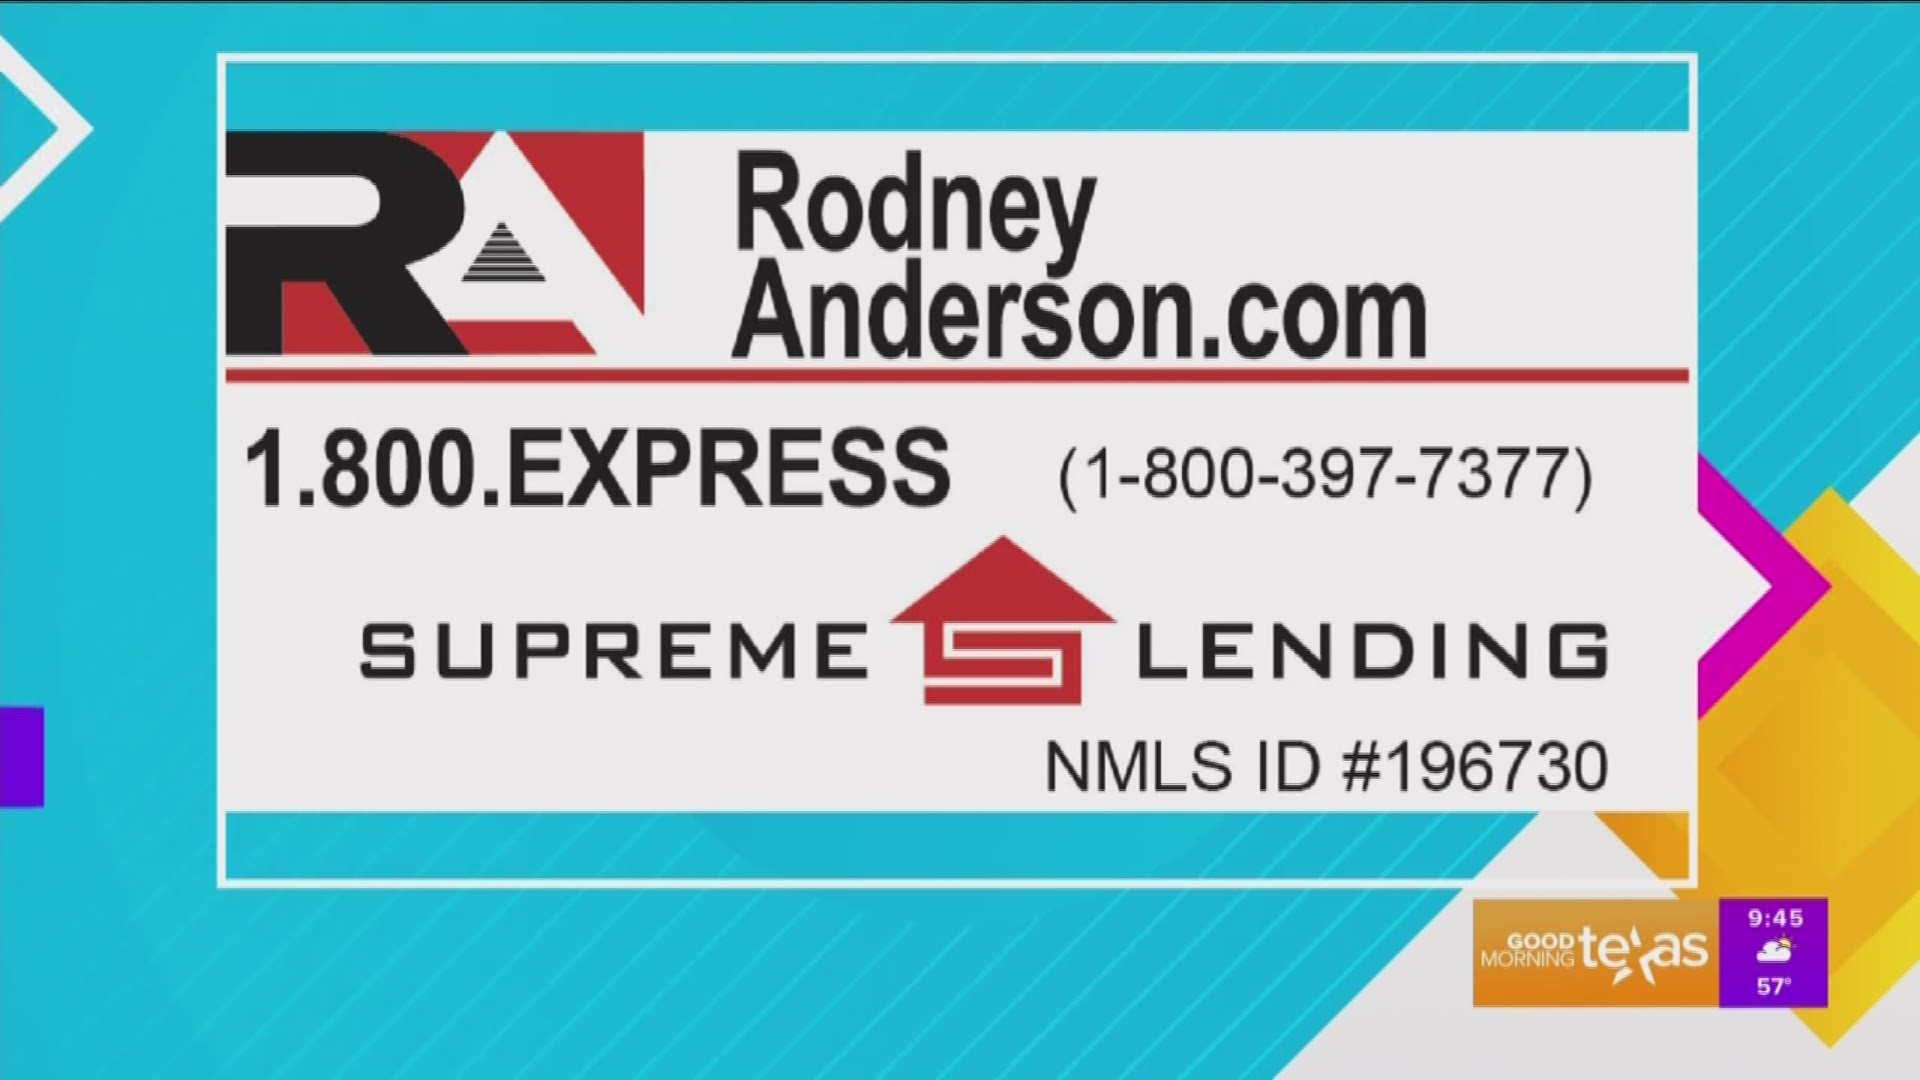 Call 800-EXPRESS or 800-397-7377 for more information or go to www.RodneyAnderson.com.